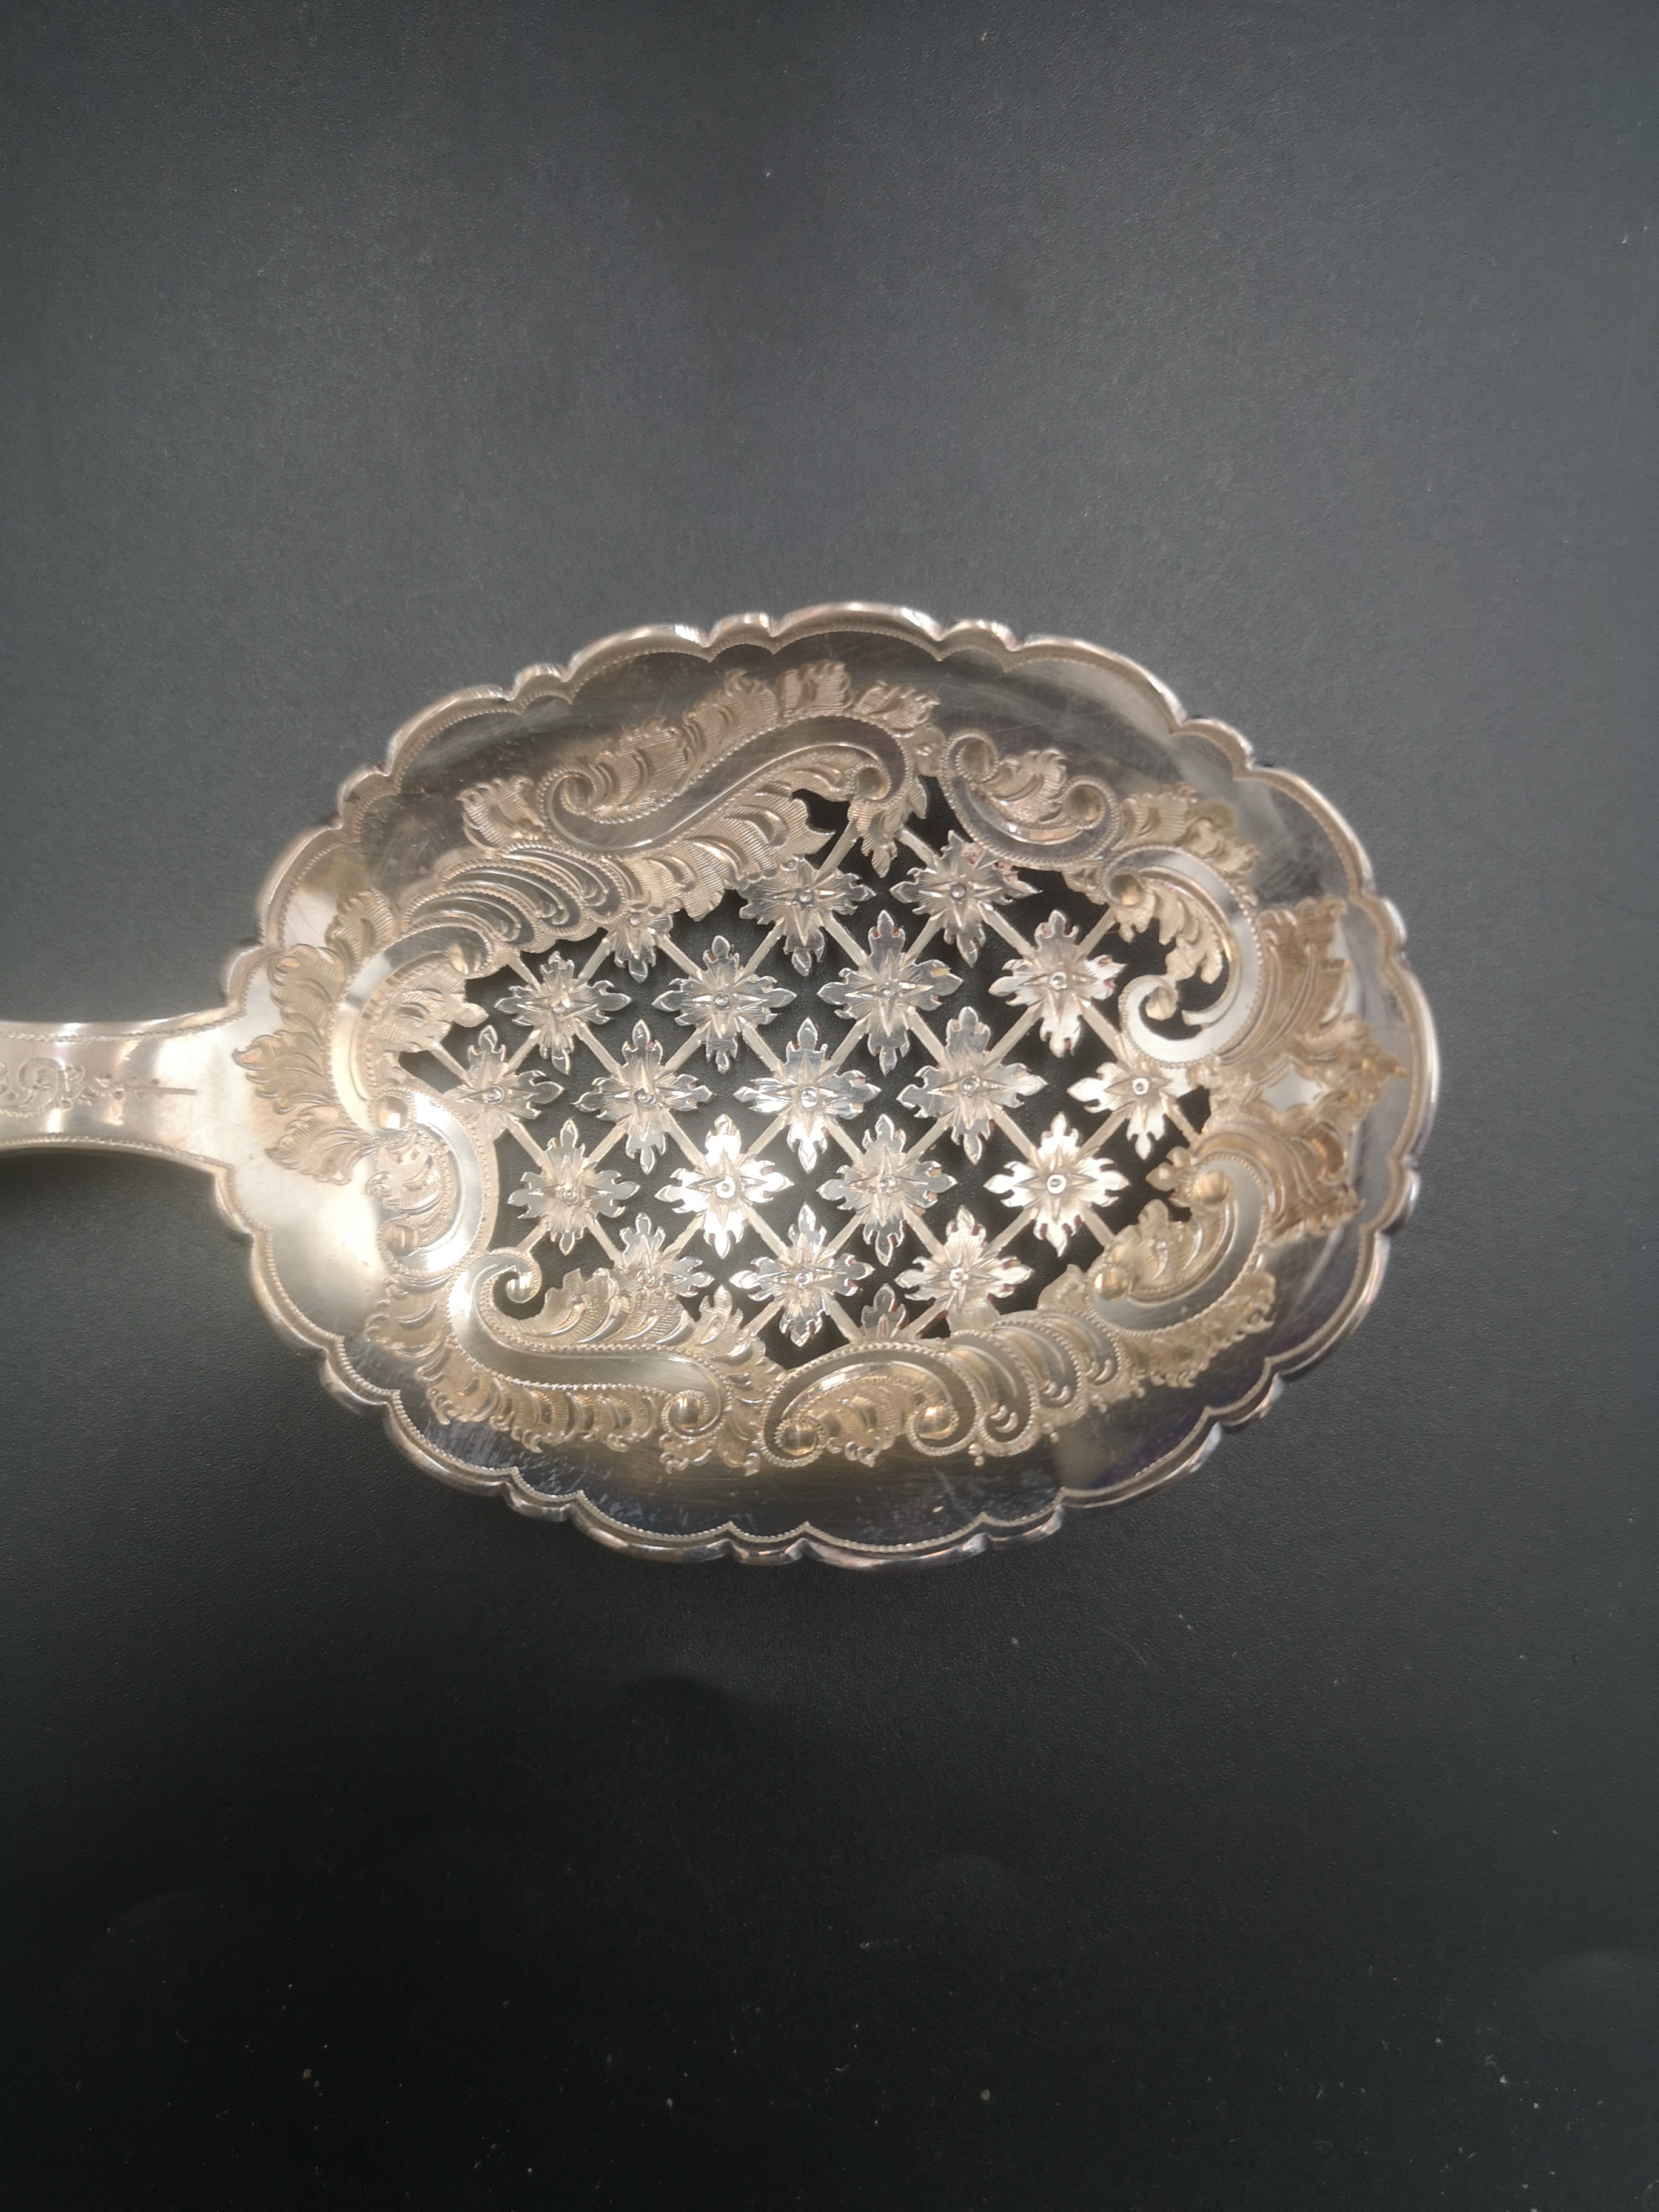 Box containing a pair of pierced and engraved silver spoons - Image 3 of 5